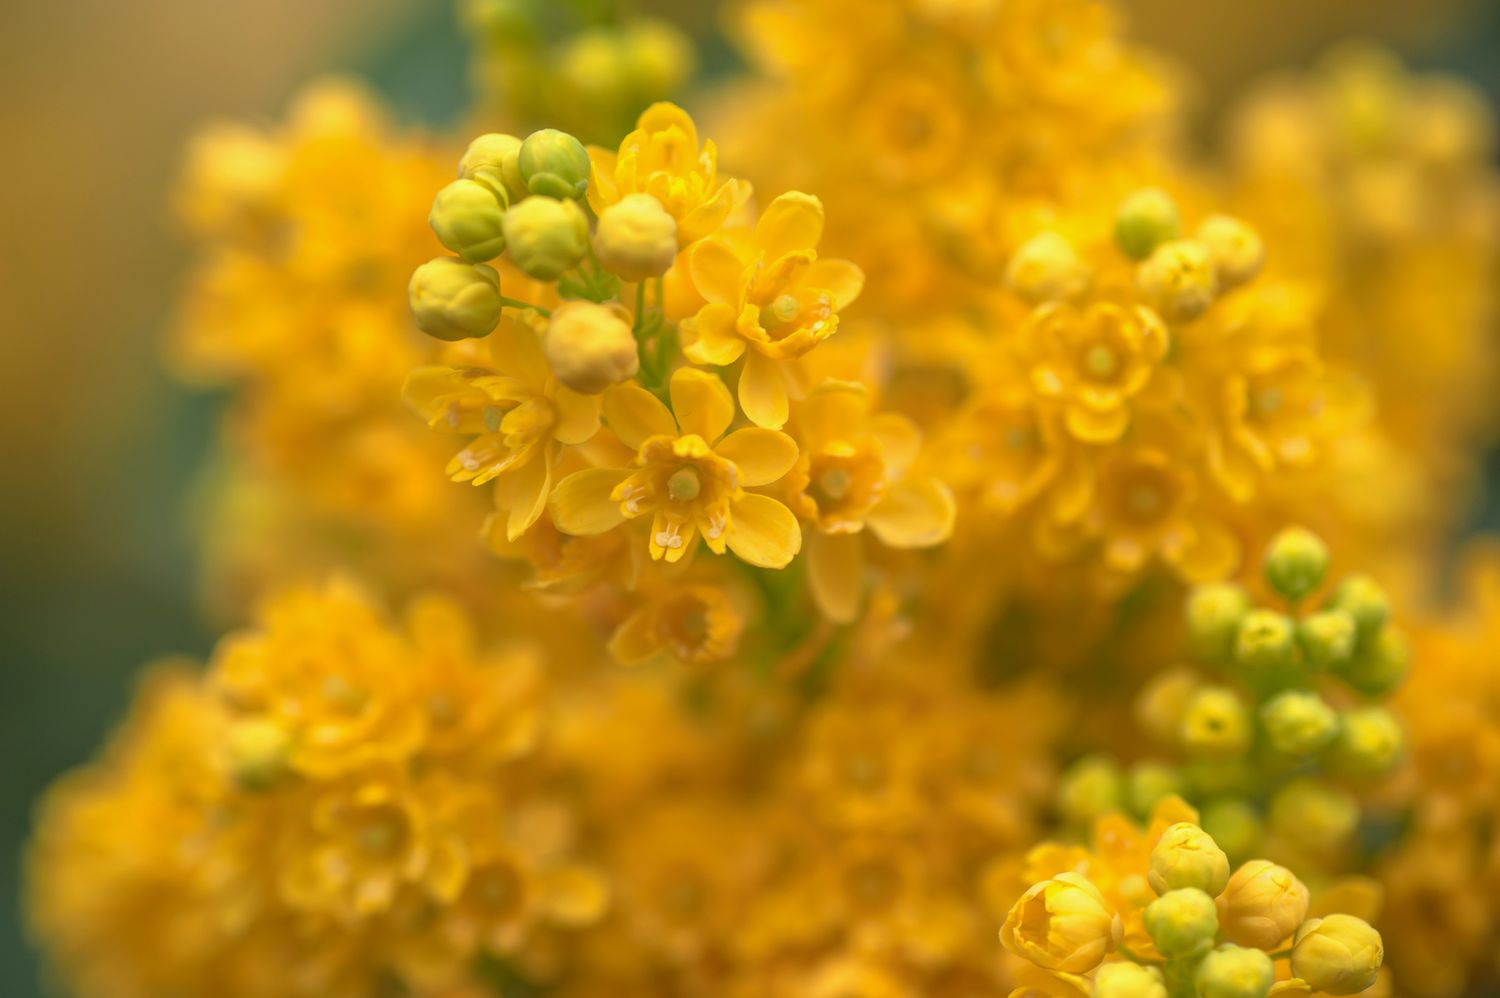 Oregon grape with yellow flowers and buds closeup